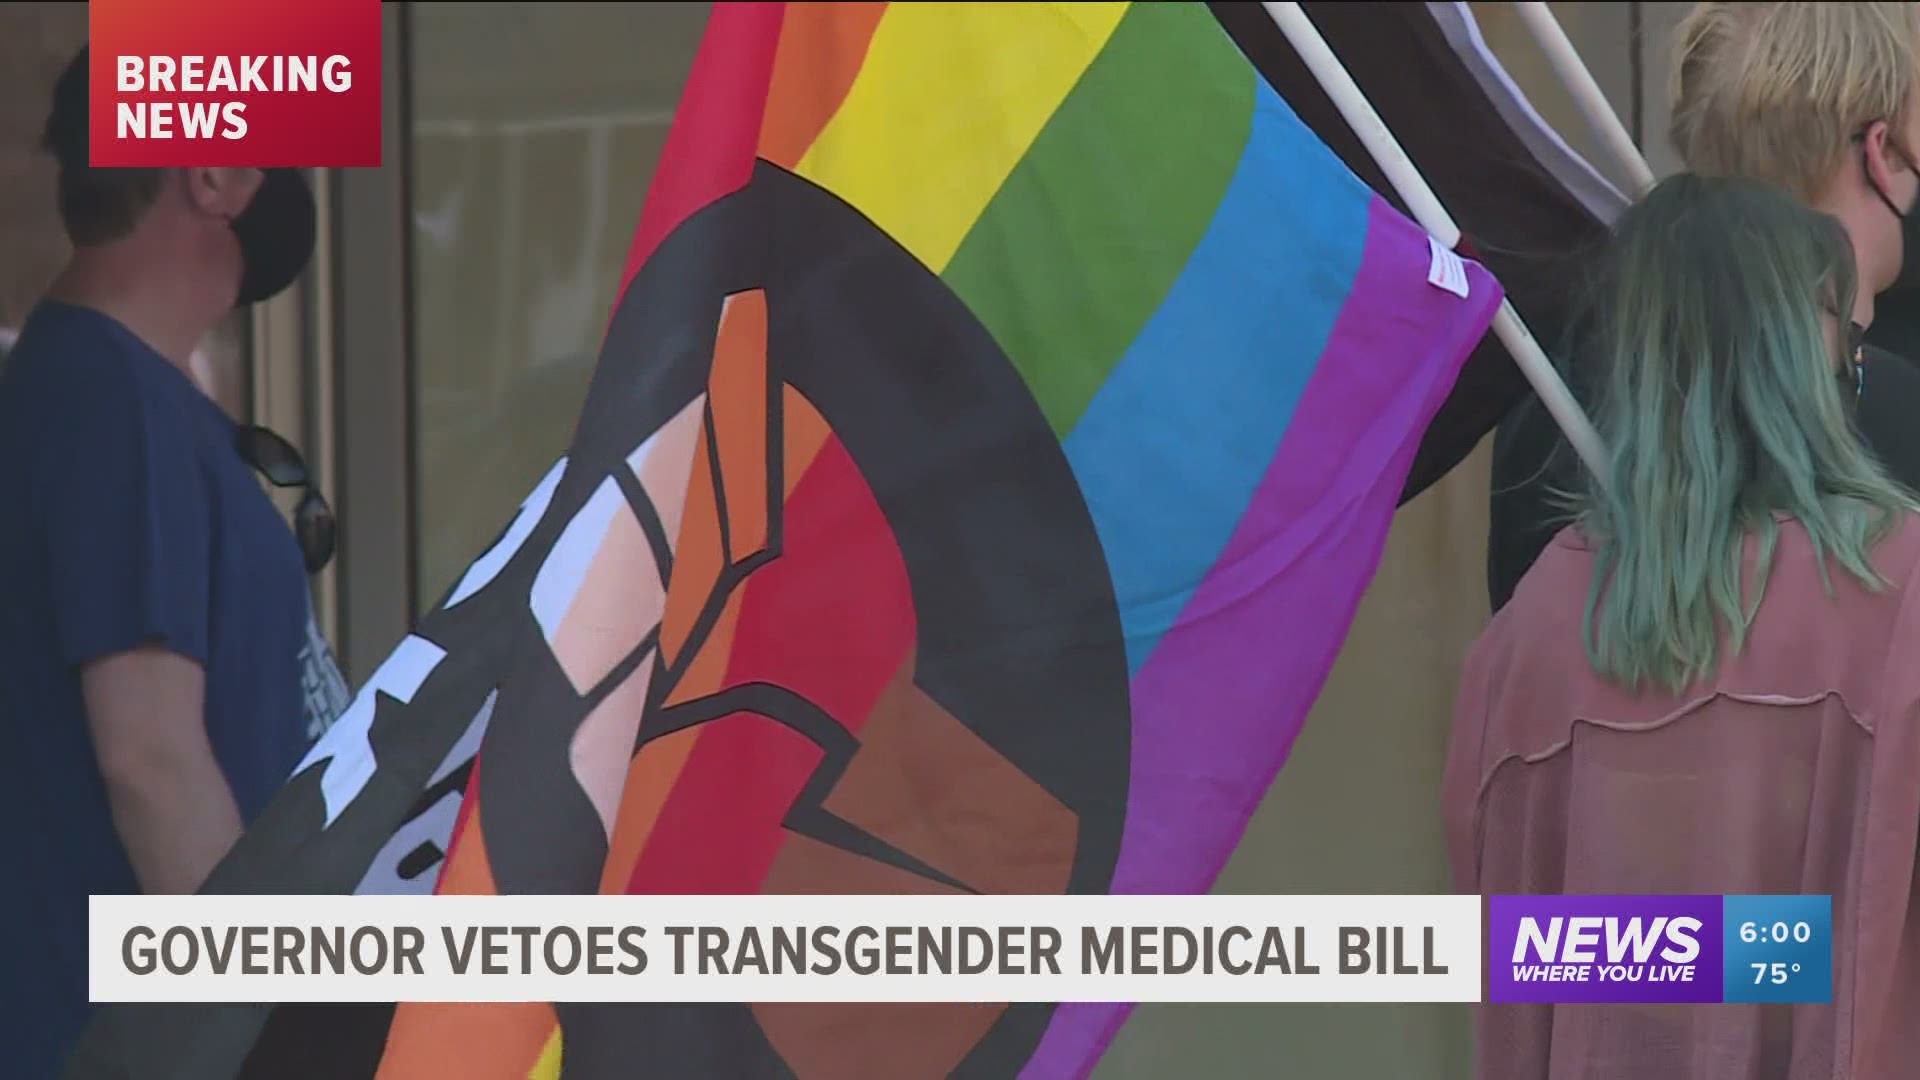 House Bill 1570 would have made it a felony for healthcare professionals to perform certain gender transition procedures on people under 18.